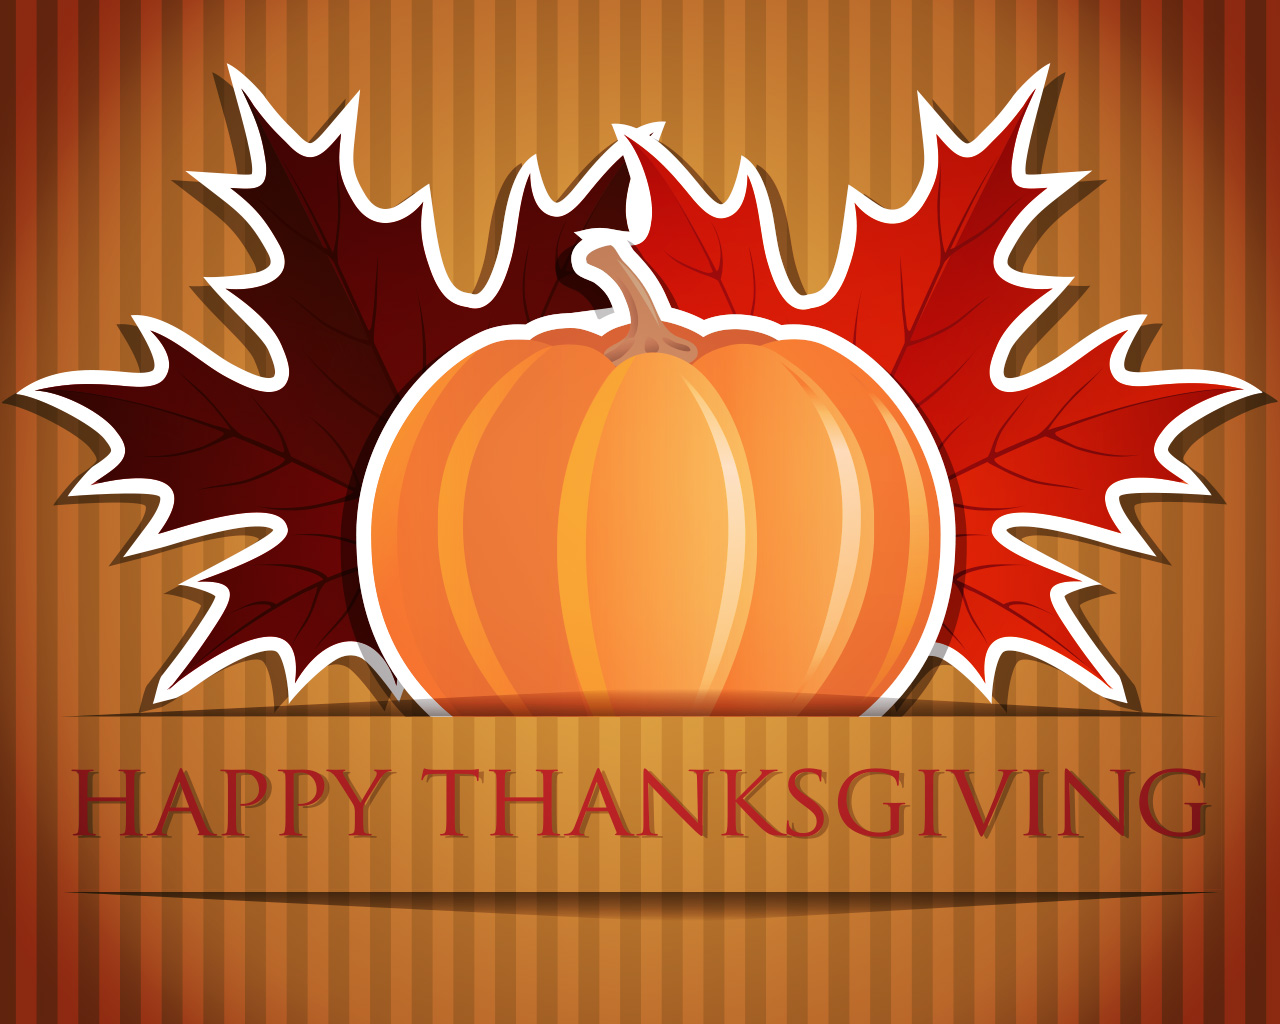 Latest Thanksgiving Wallpapers 2013 | Online Magazine for ...